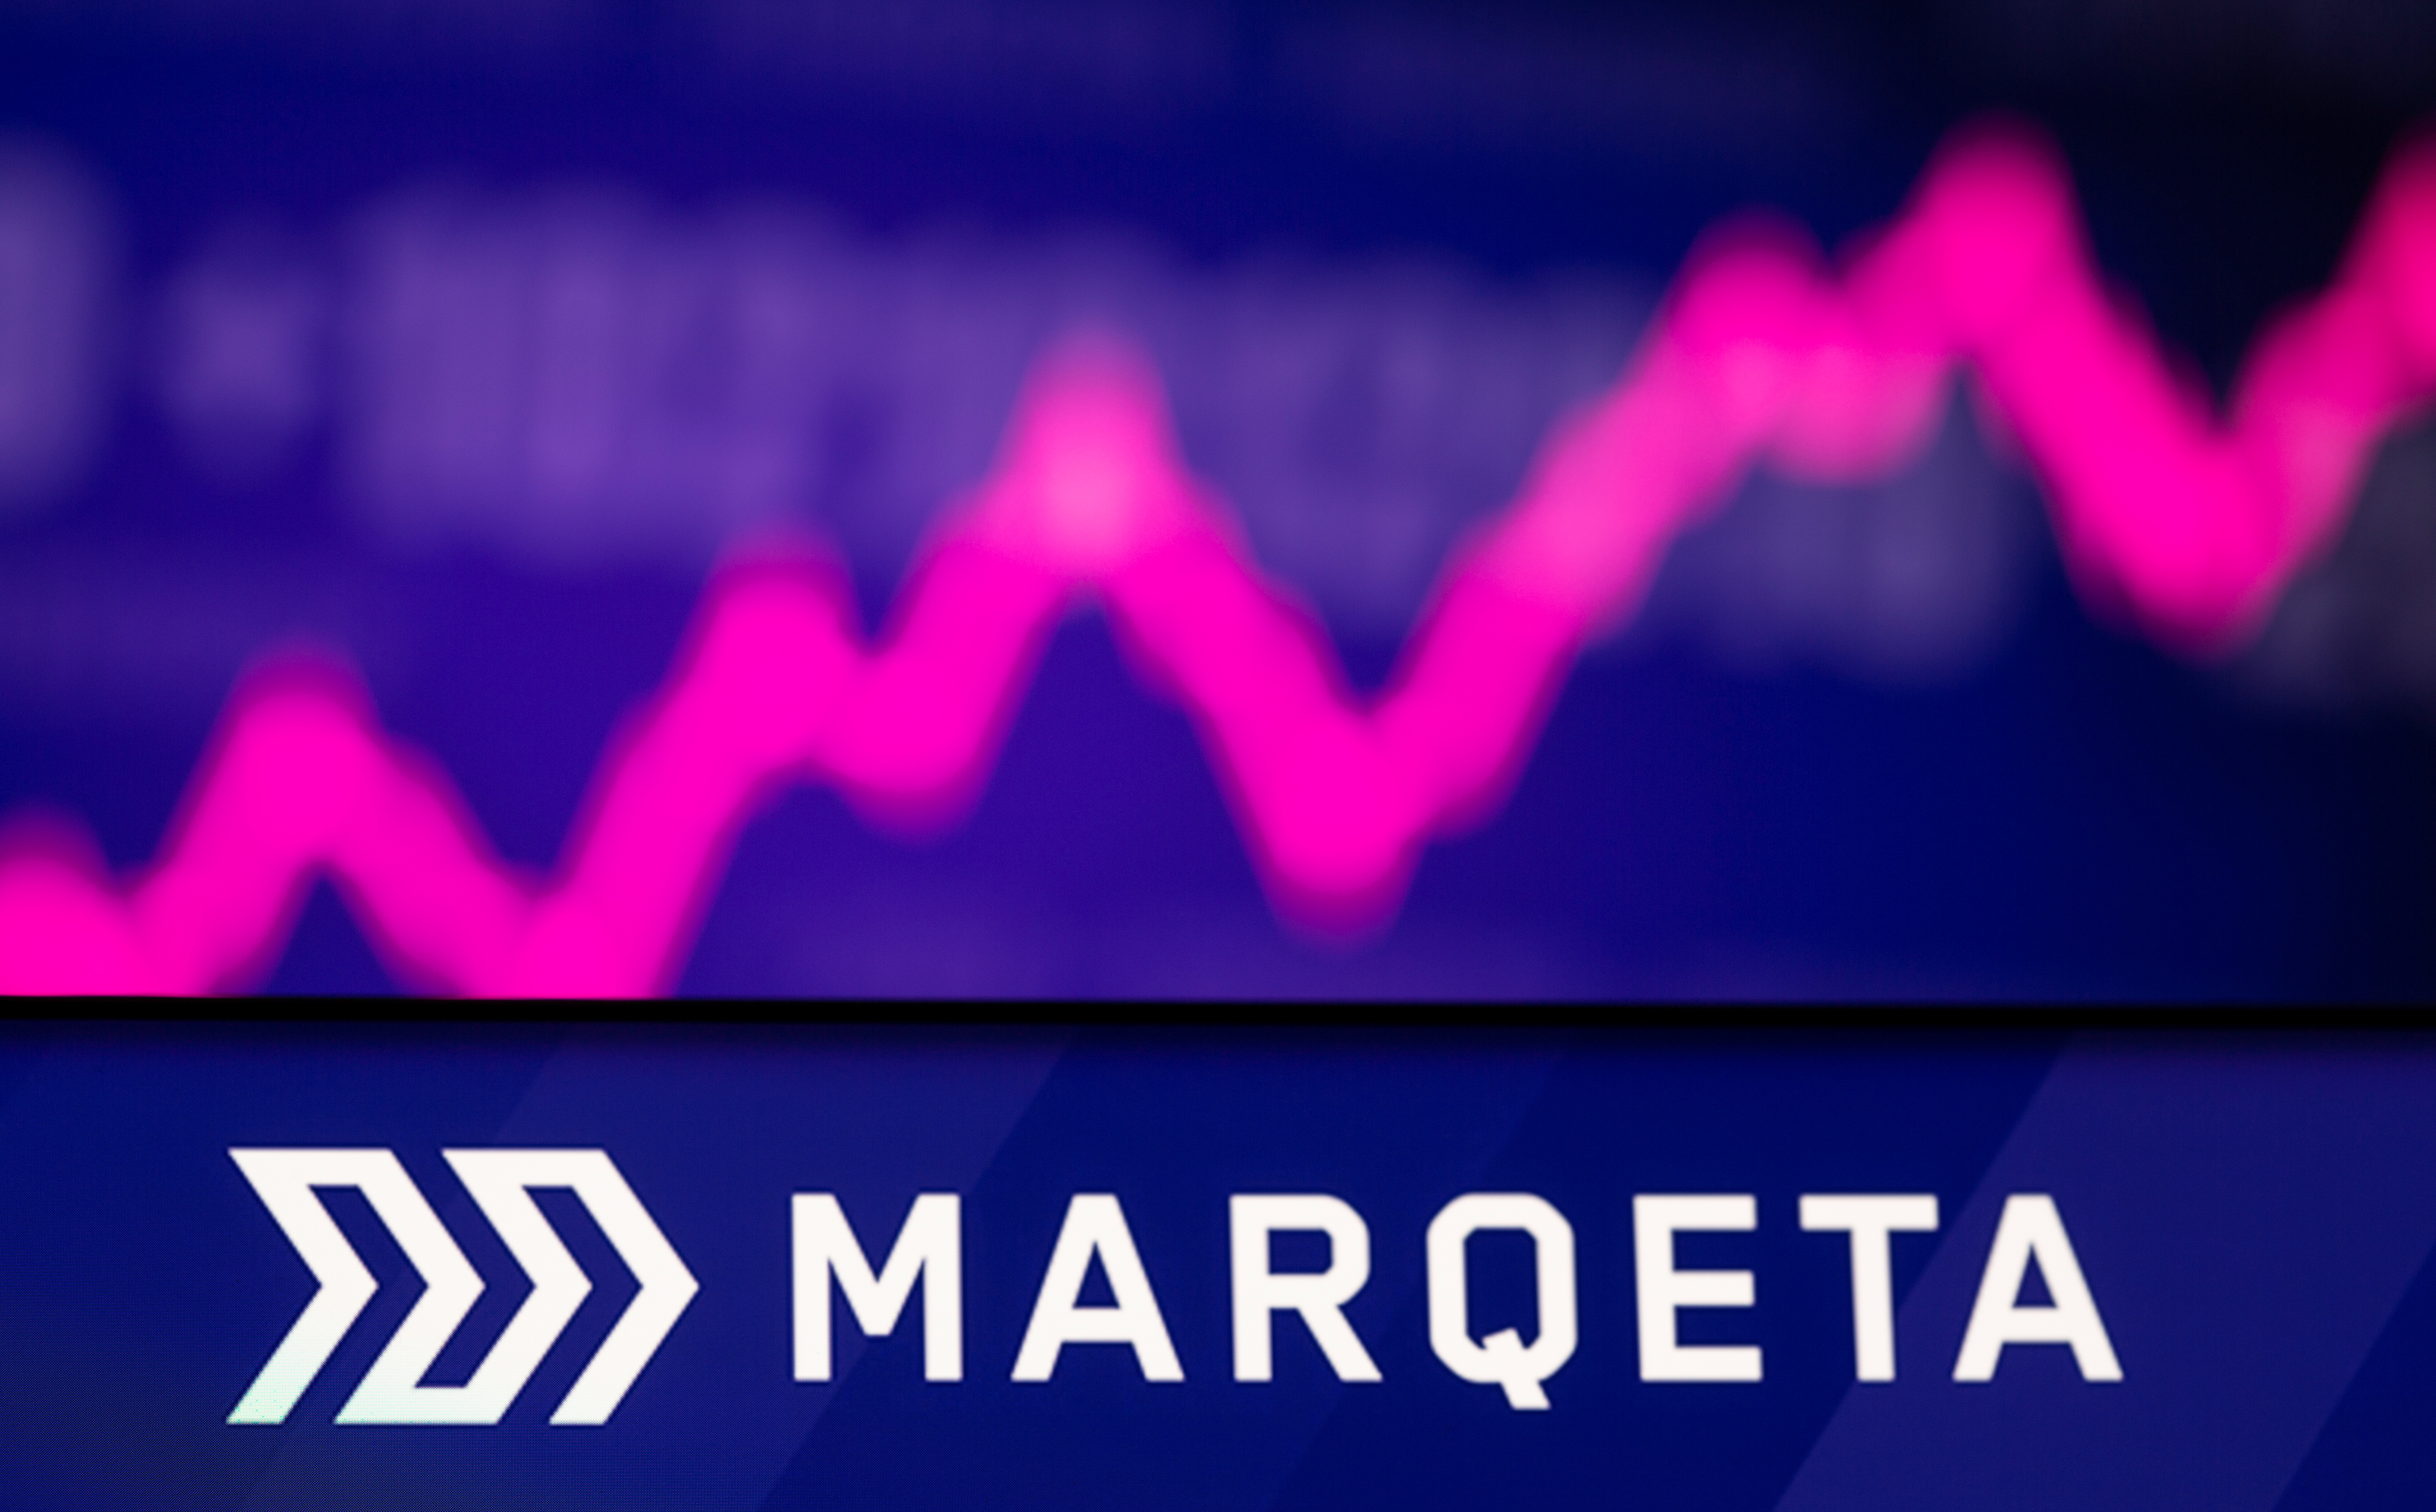 Illustration  picture of Marqeta logo in front of displayed stock graph